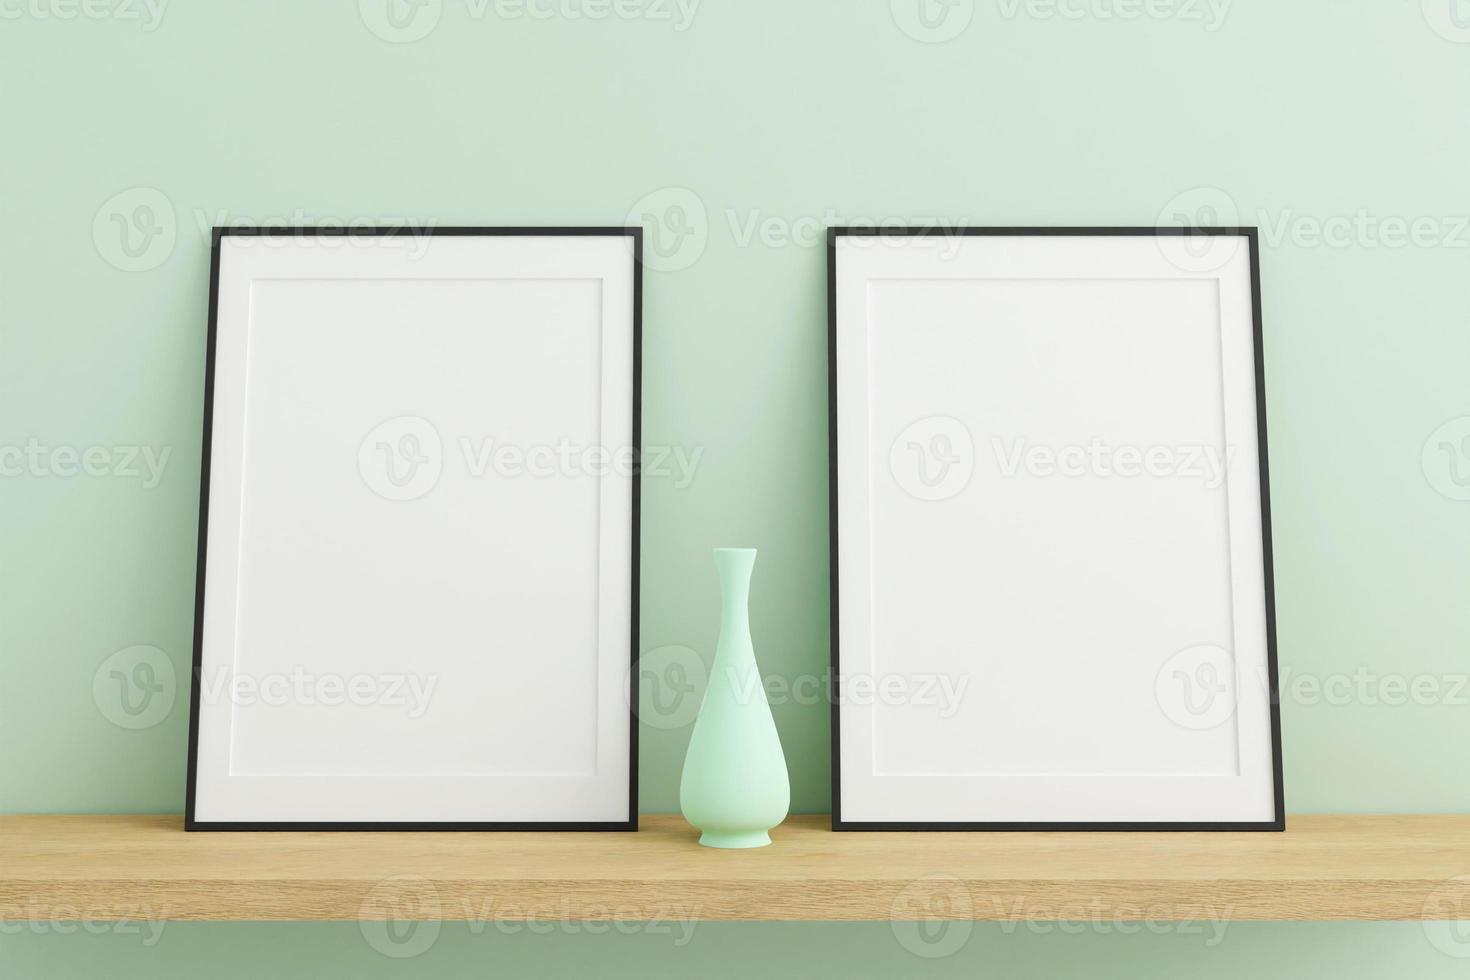 Vertical black poster or photo frame mockup on wooden table in living room interior with vase. 3D rendering.